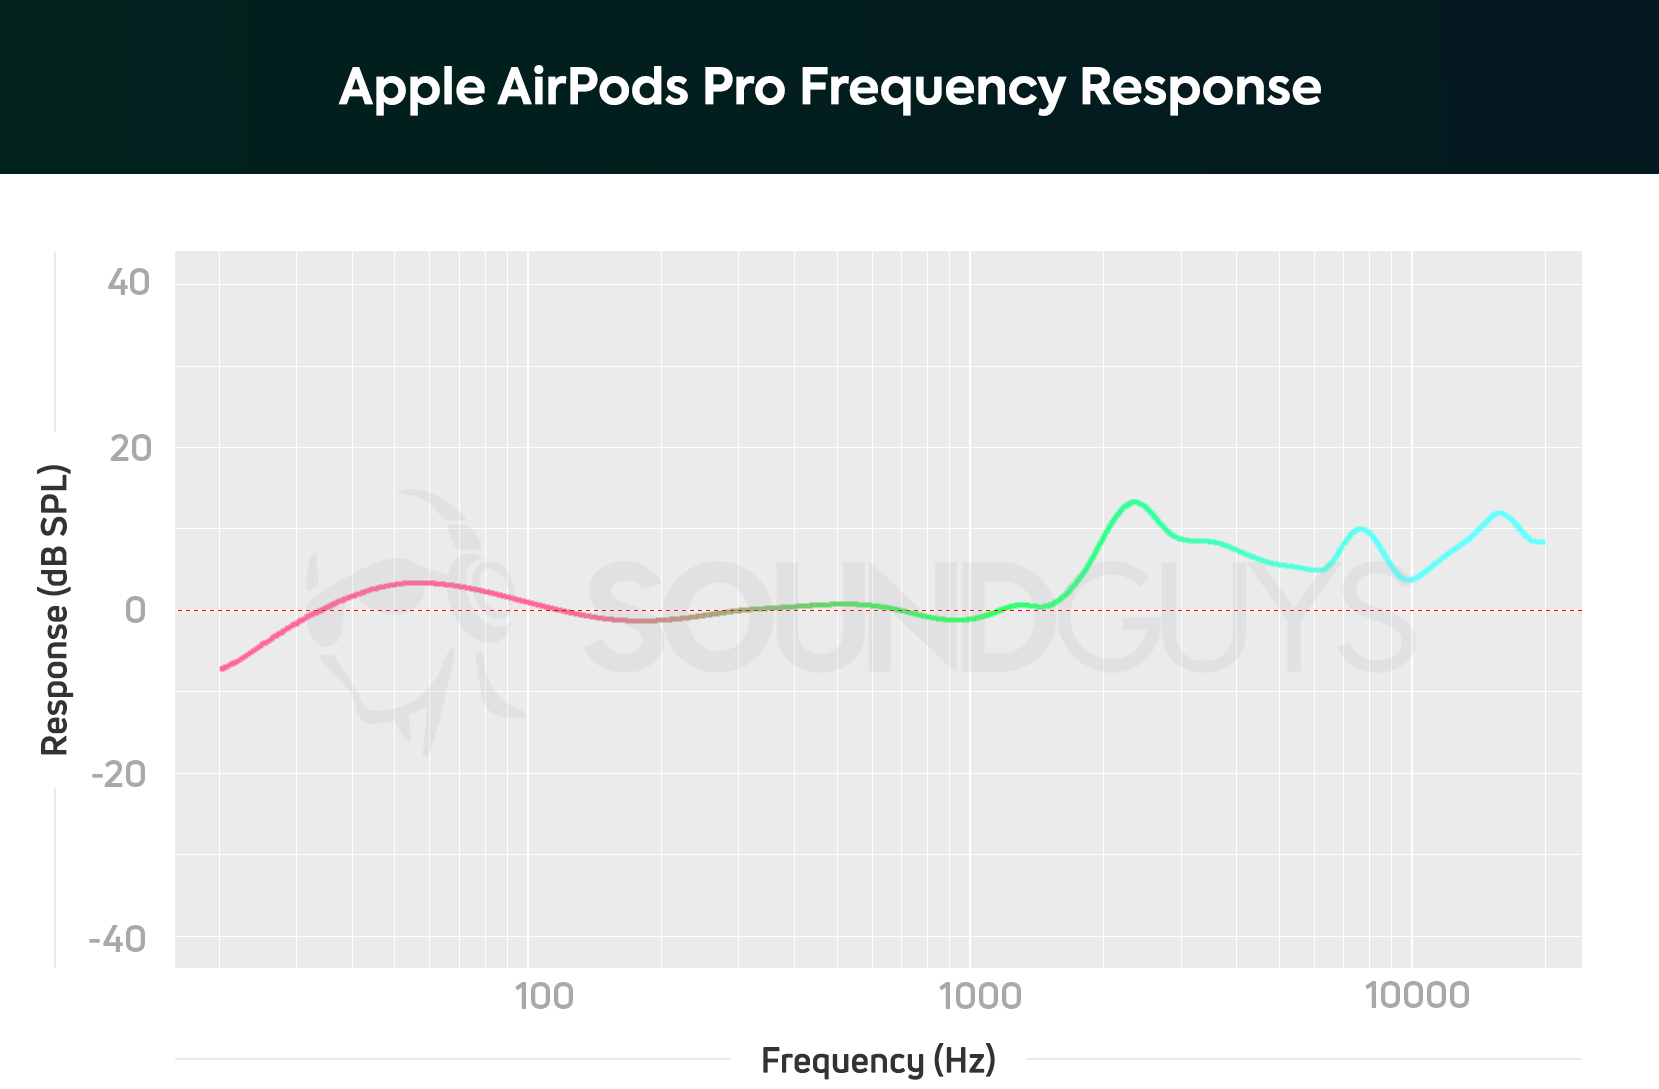 A line graph depicts the Apple AirPods Pro frequency response, which reproduces accurate midrange frequencies and amplified treble notes.